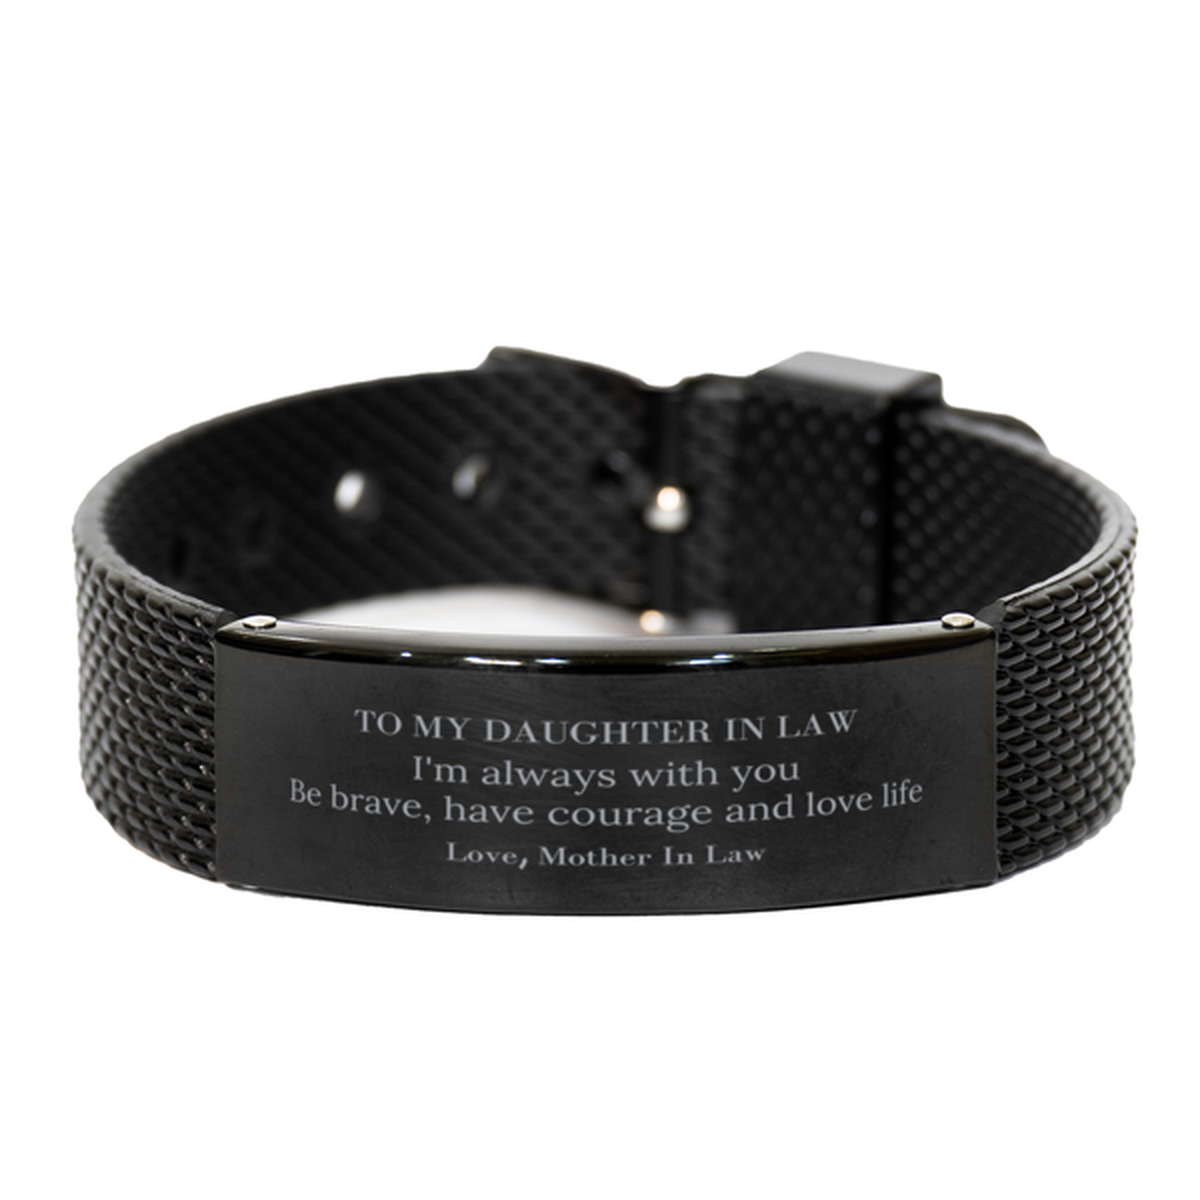 To My Daughter In Law Gifts from Mother In Law, Unique Black Shark Mesh Bracelet Inspirational Christmas Birthday Graduation Gifts for Daughter In Law I'm always with you. Be brave, have courage and love life. Love, Mother In Law